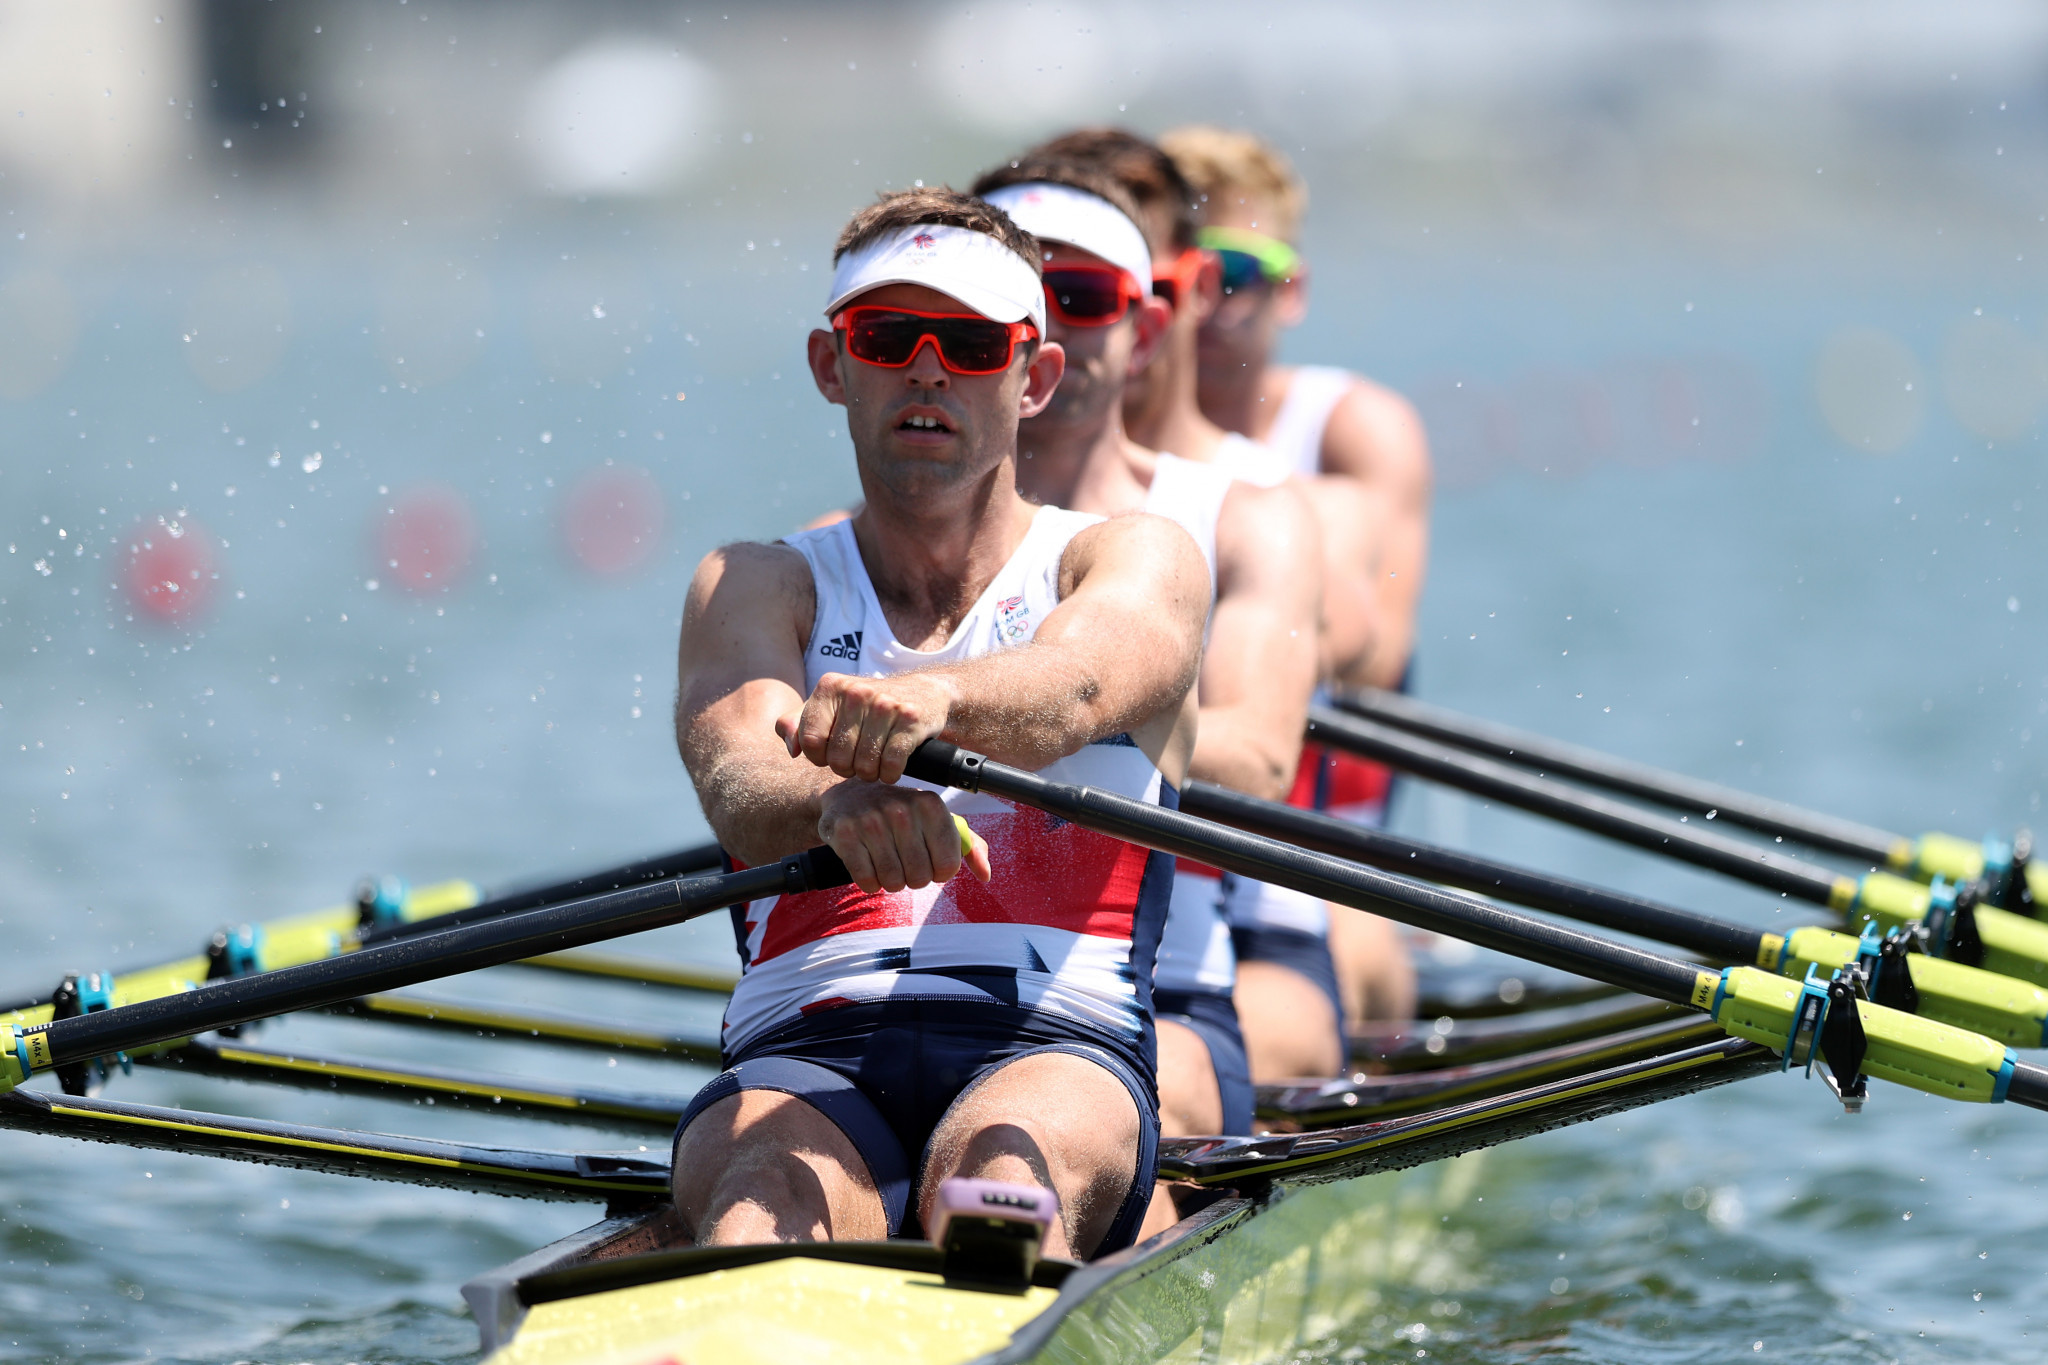 Harry Leask, Angus Groom, Tom Barras and Jack Beaumont won silver in the quadruple sculls at Tokyo 2020 under the guidance of Paul Stannard ©Getty Images